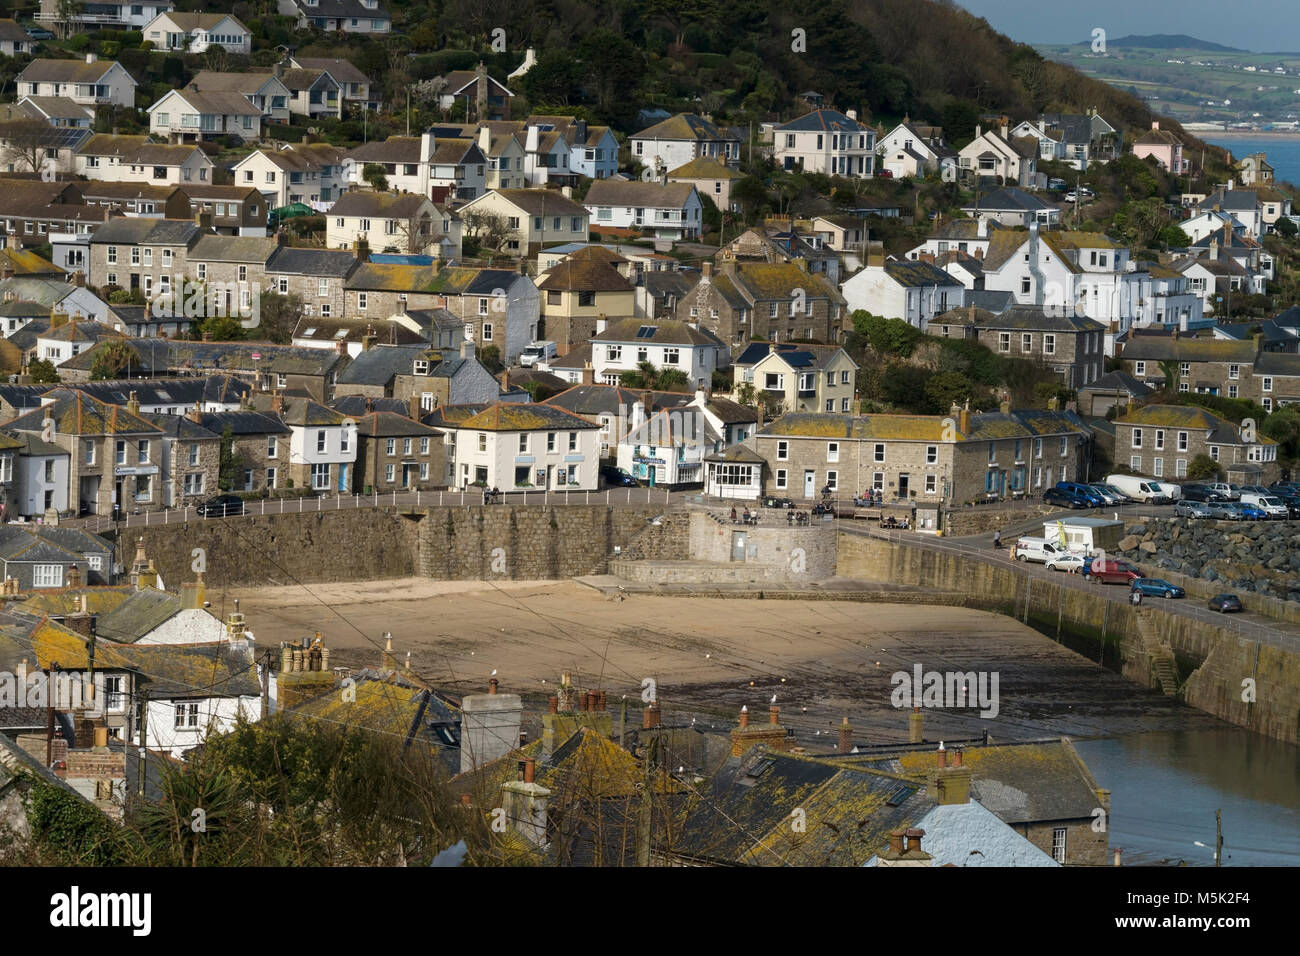 Mousehole Cornish coastal town and harbour from above, Cornwall, England, UK. Stock Photo